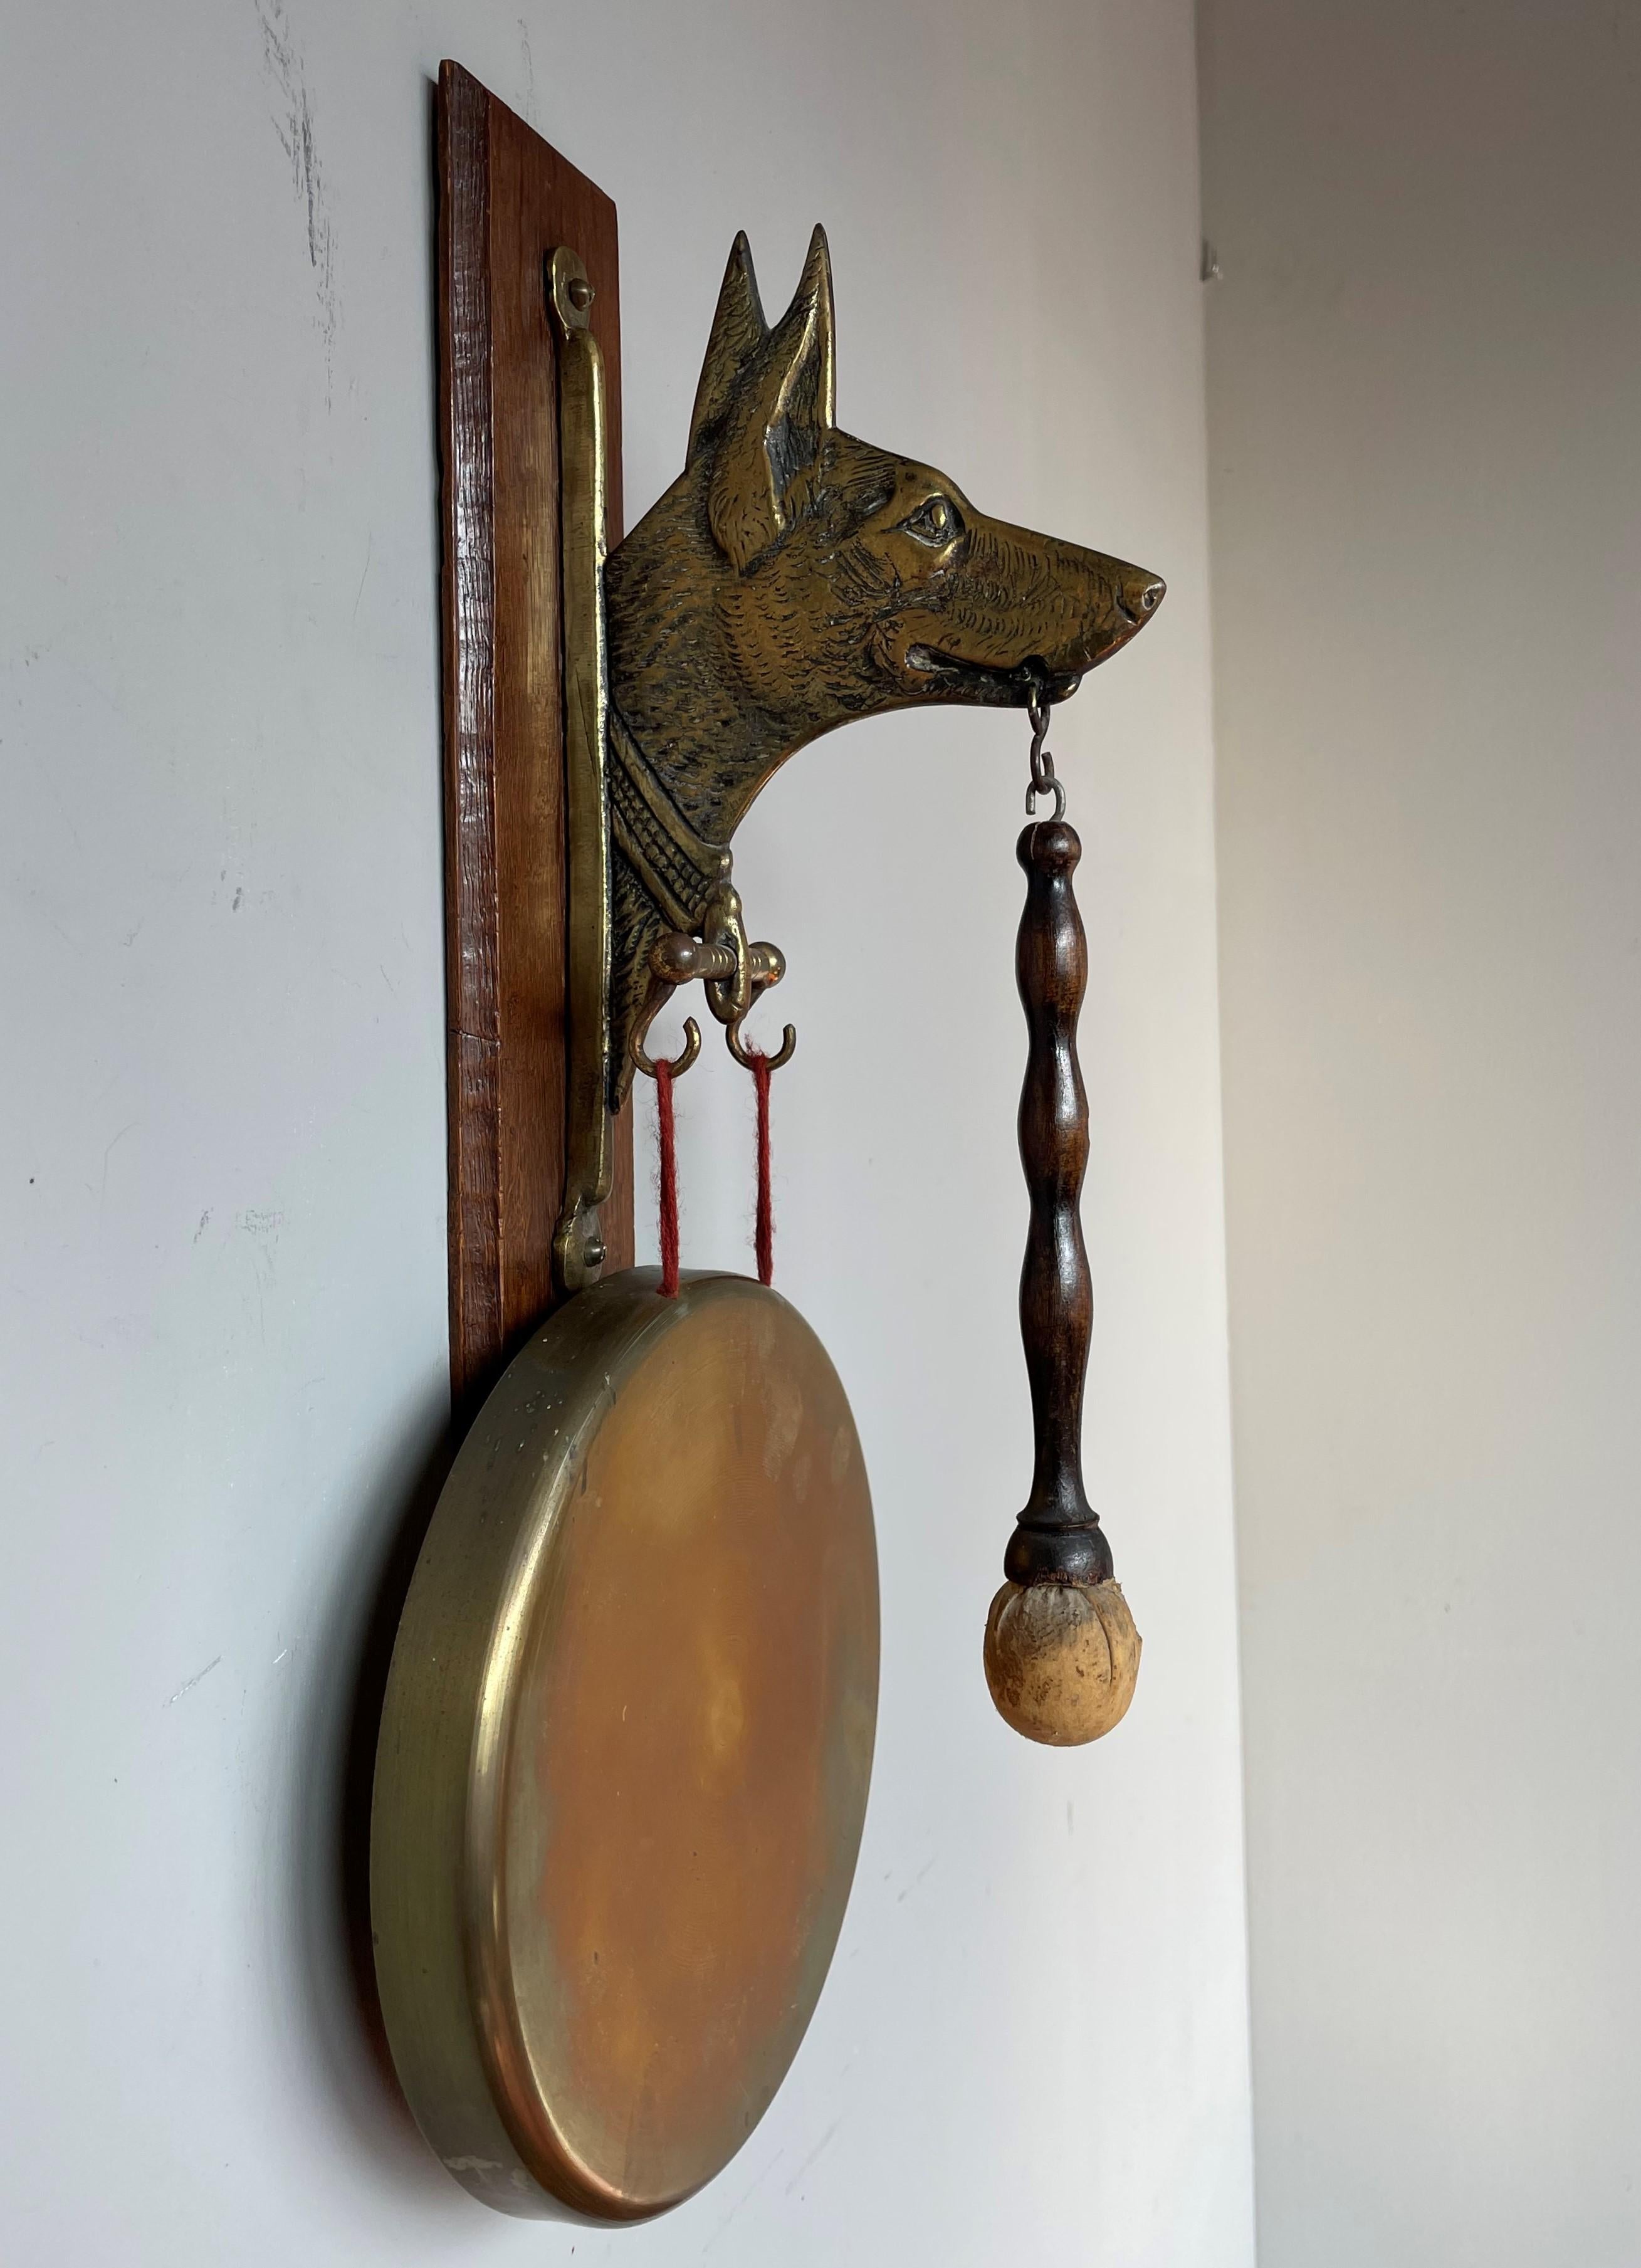 Brass Arts & Crafts House Gong for Wall Mounting with Bronze Sheepdog Sculpture, 1920